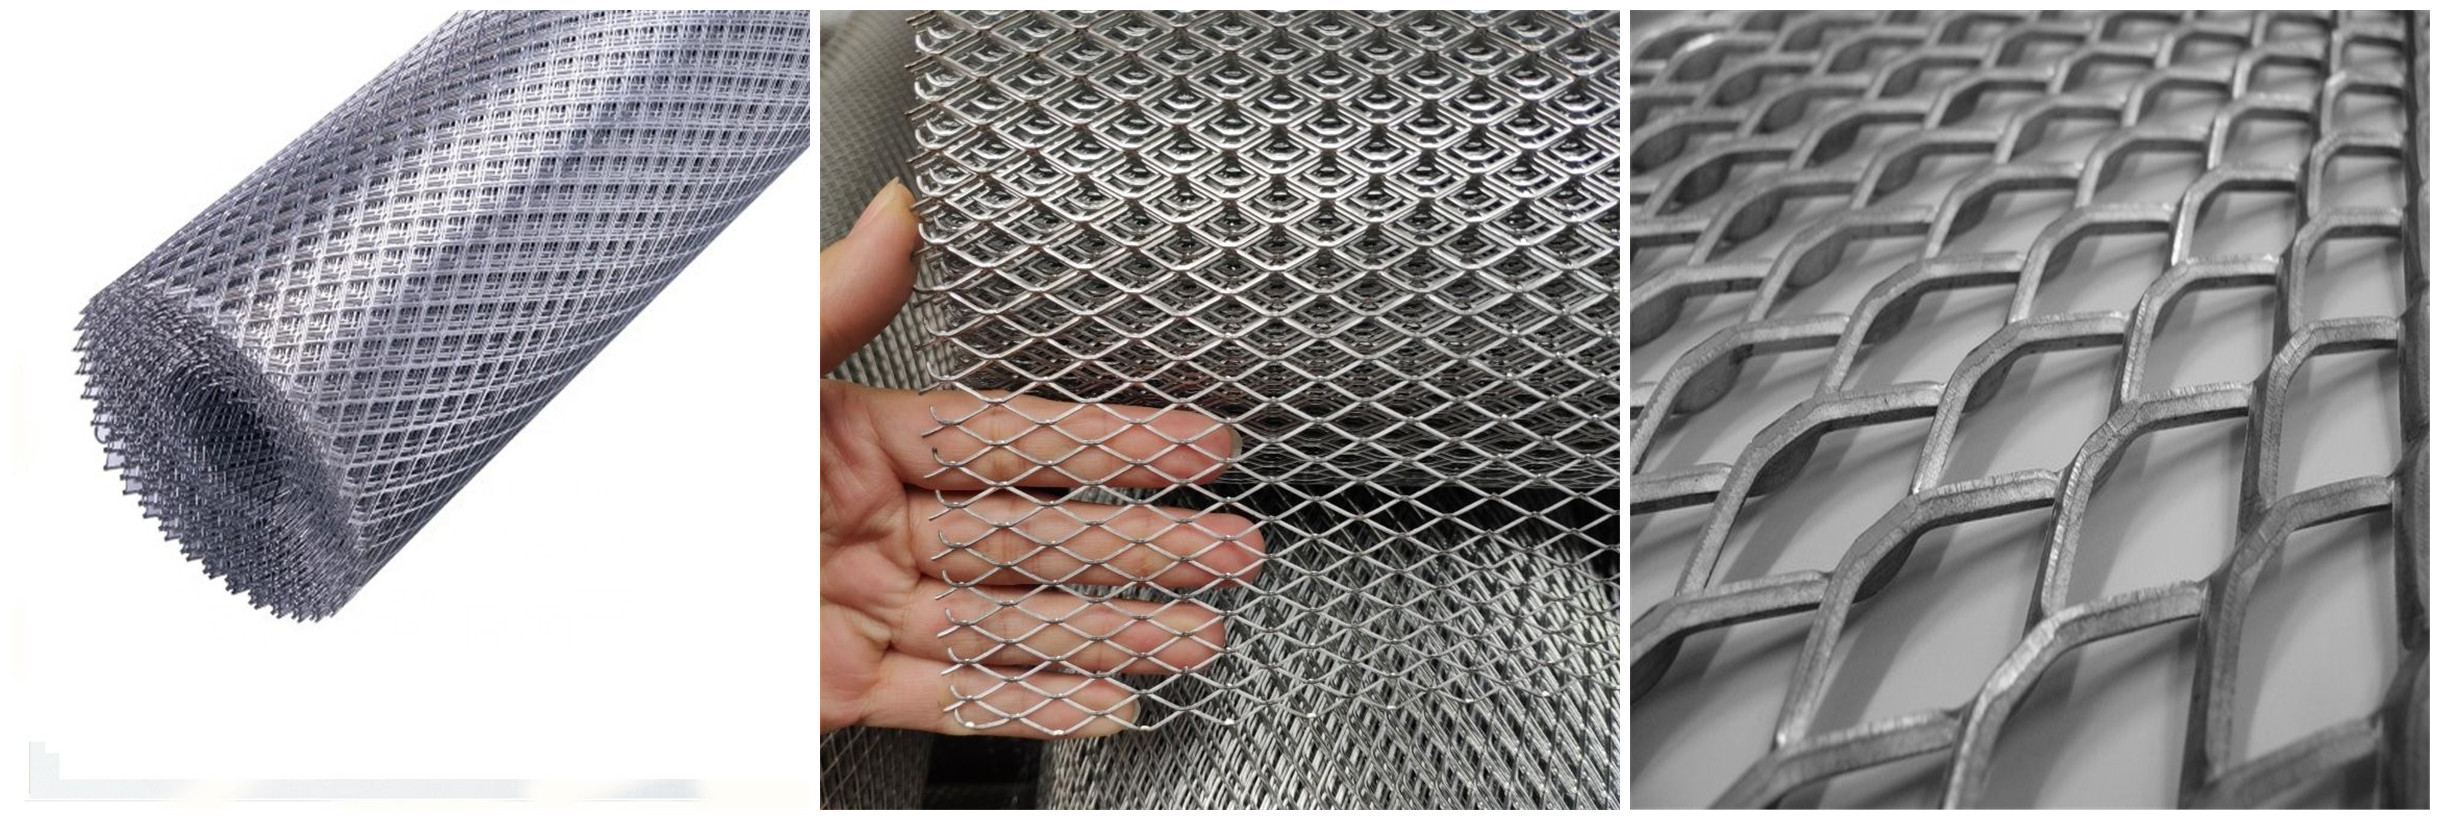 Hebei Yicheng Wire Mesh Products Co., Ltd